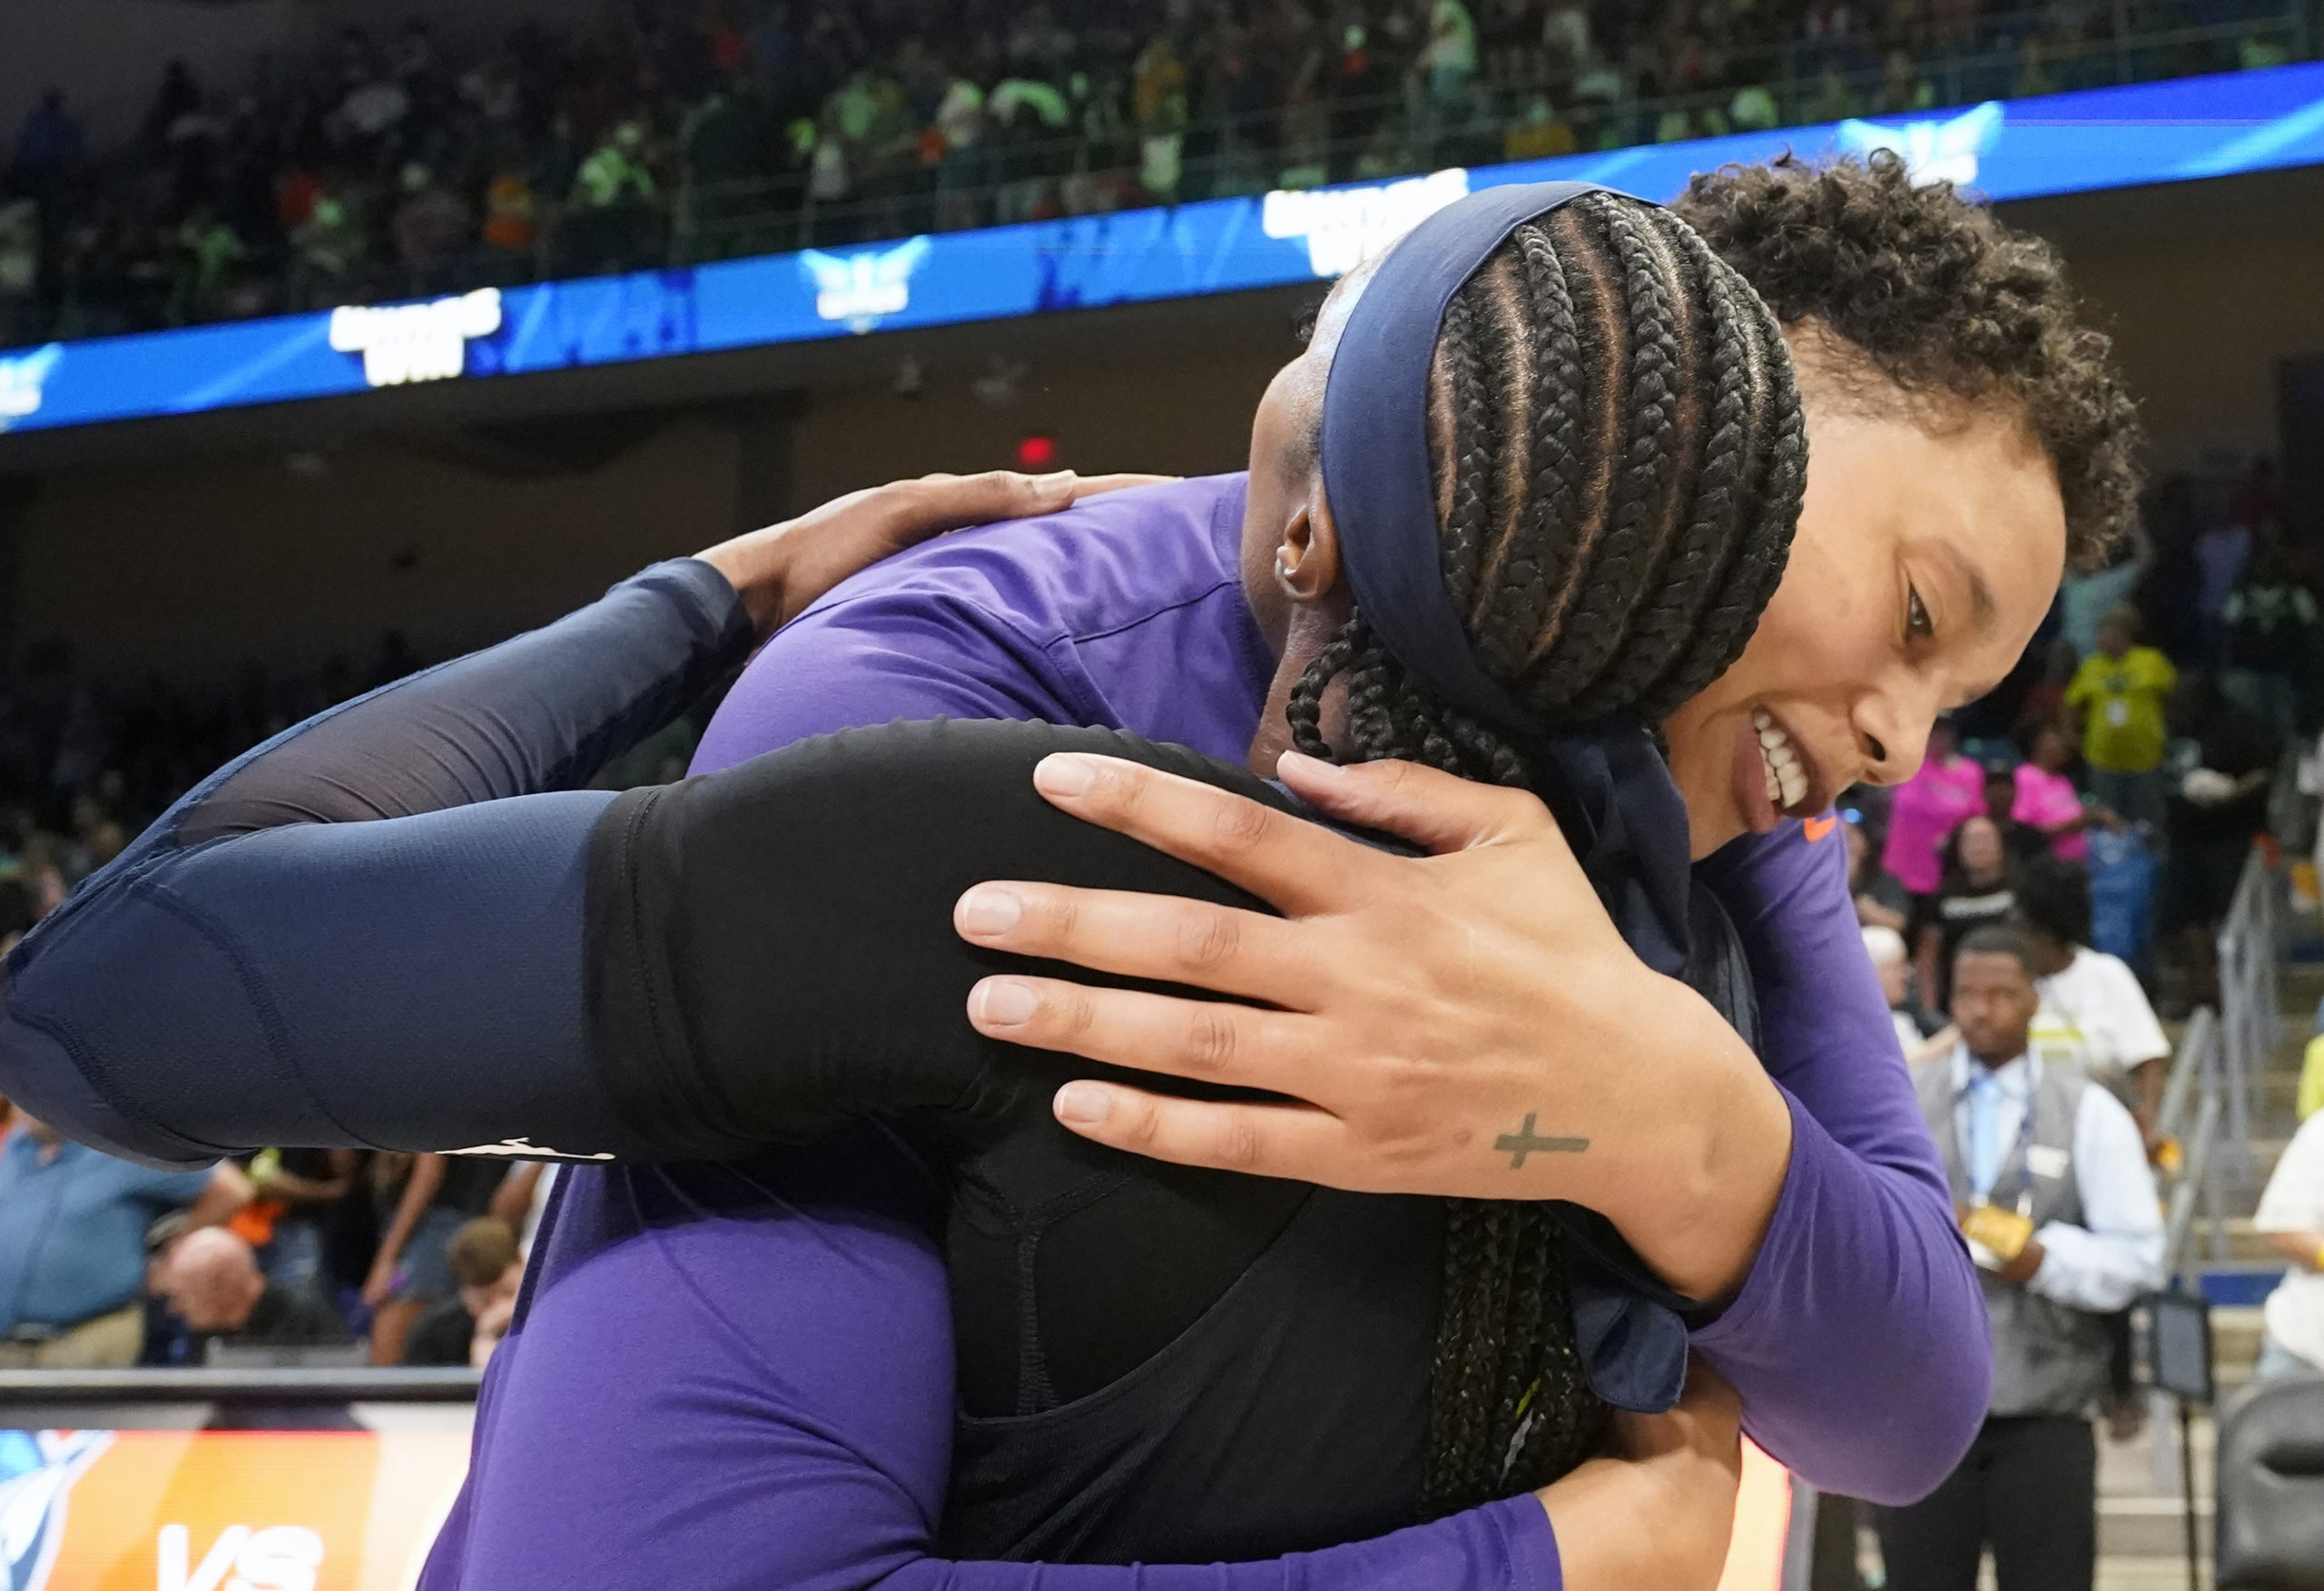 Brittney Griner, right, hugs former college teammate Odyssey Sims, left, after a WNBA basketball basketball game in Arlington, Texas, on Friday.